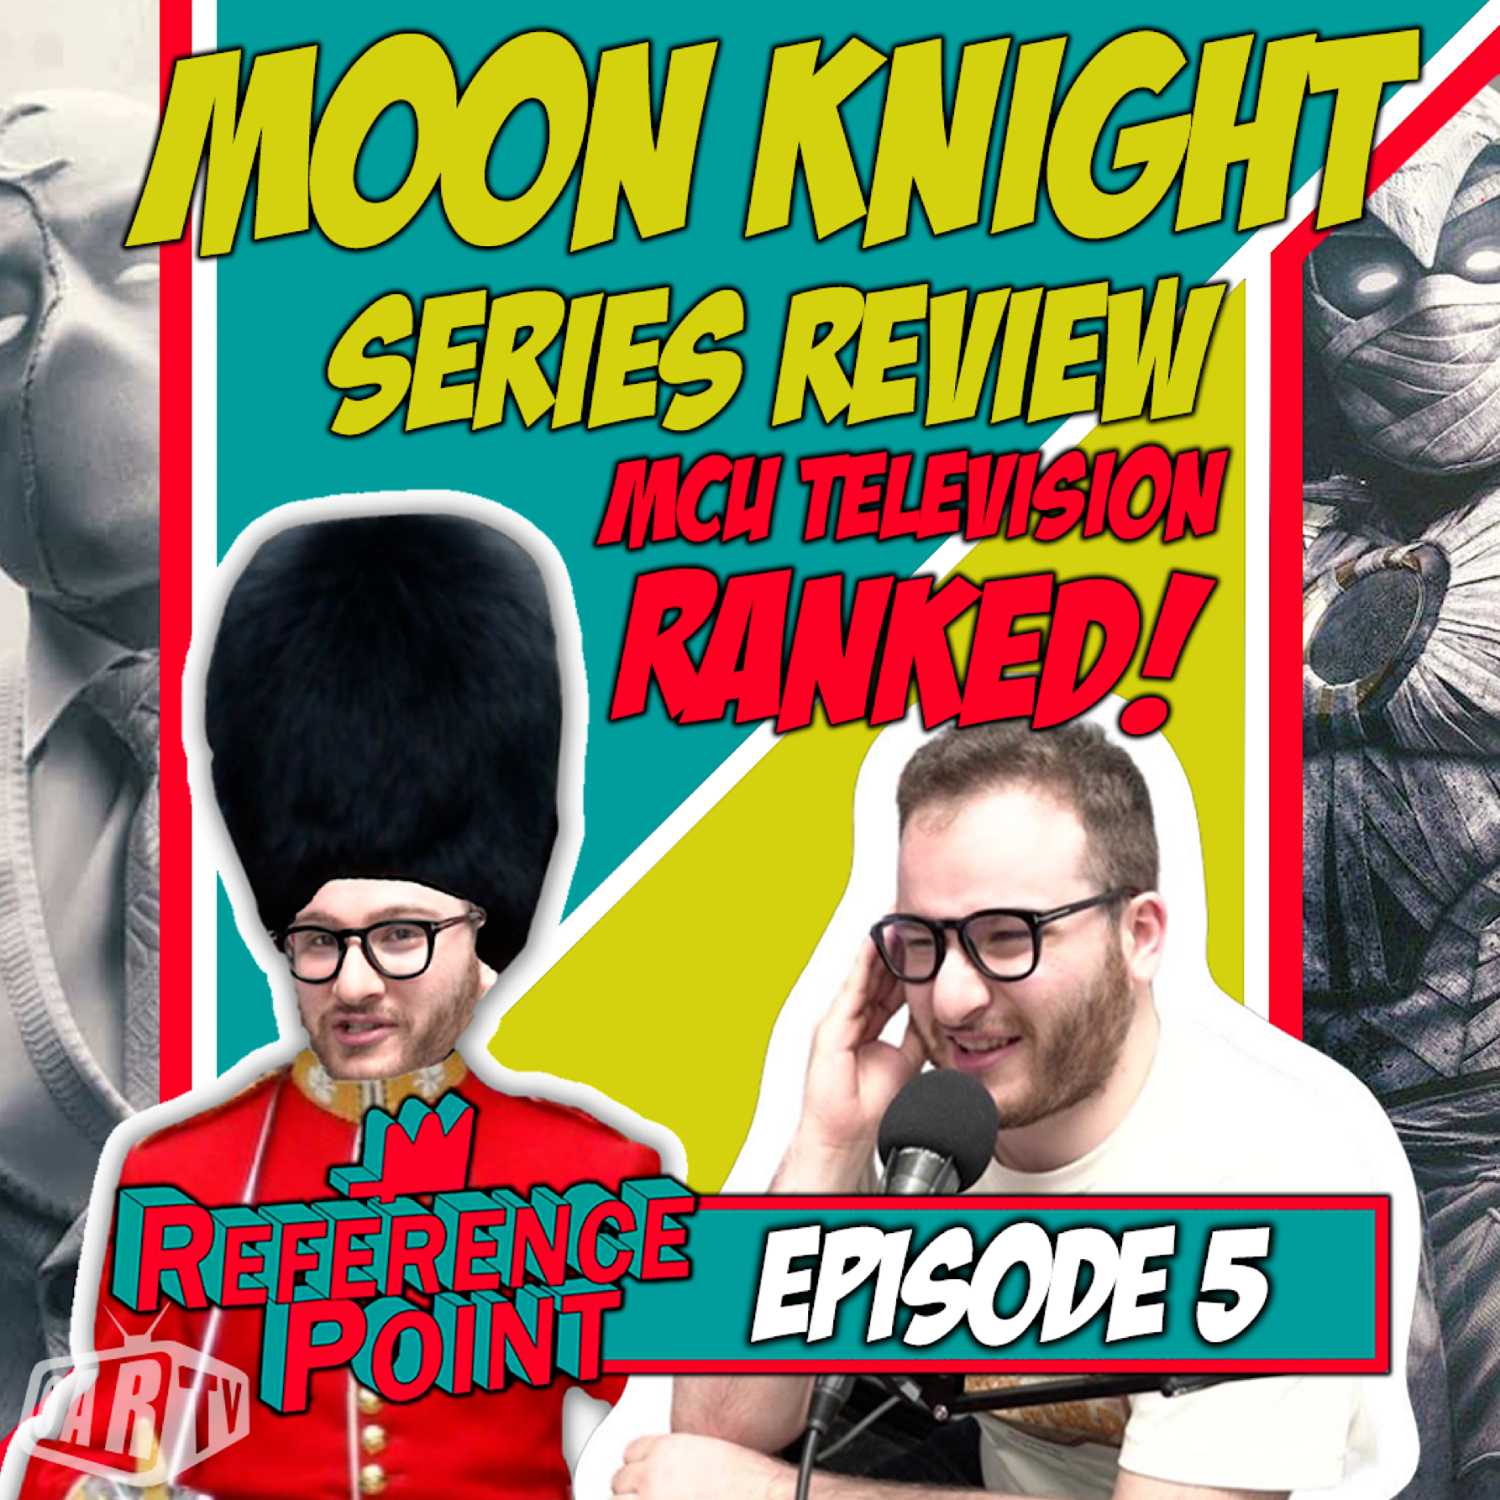 REFERENCE POINT - Episode 5 - "Moon Knight" Series Review